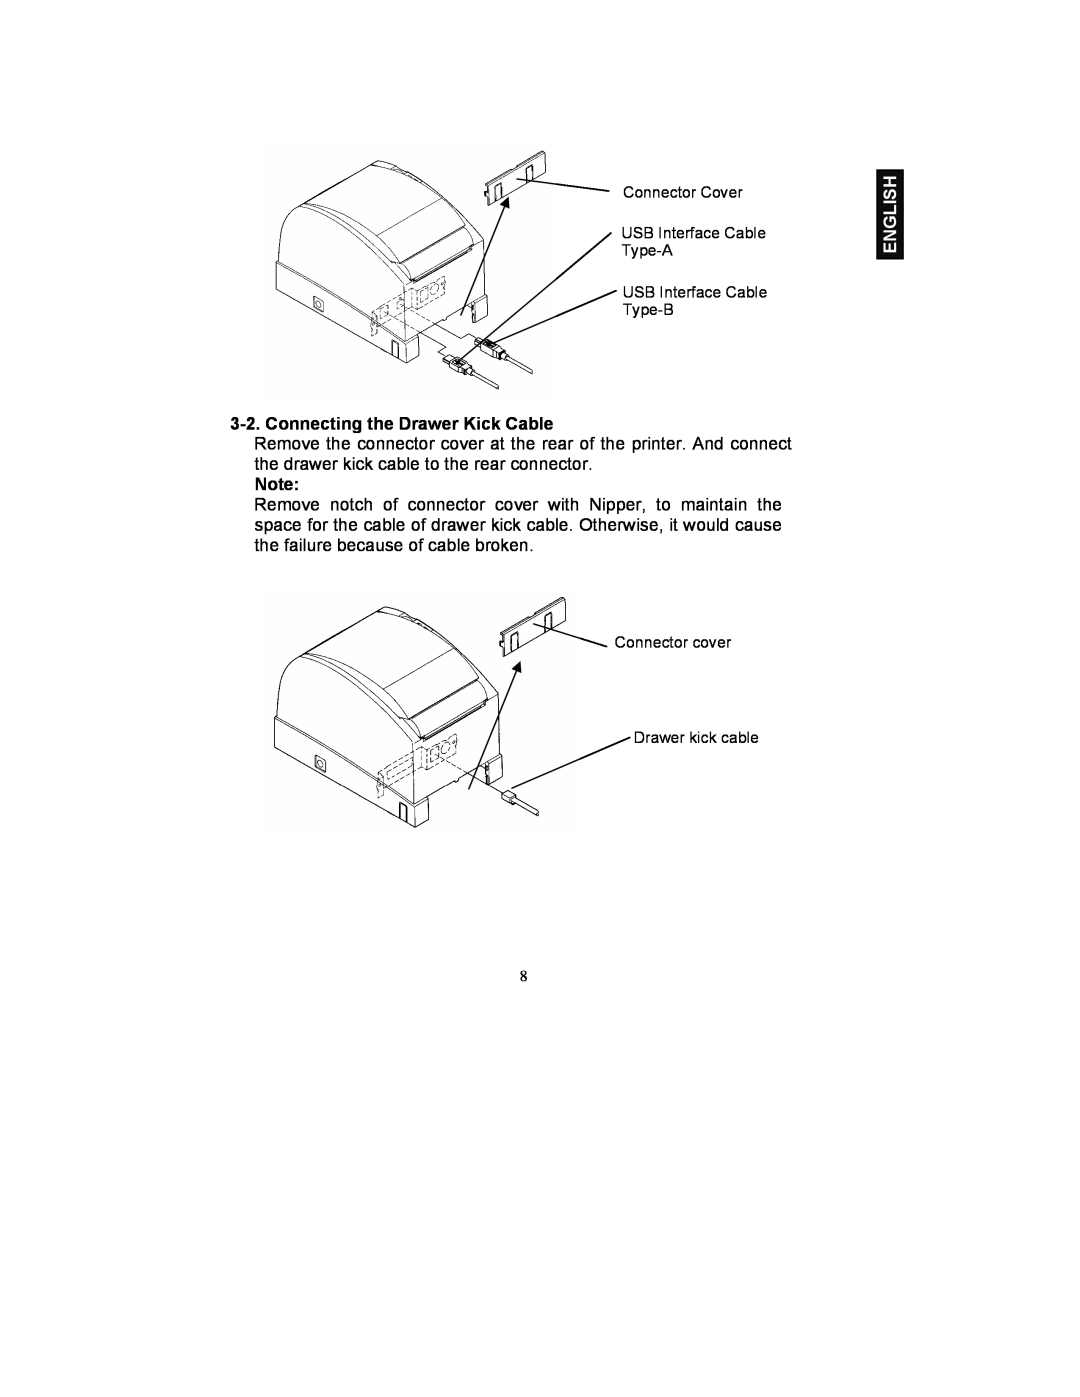 Fujitsu FP-410 user manual Connecting the Drawer Kick Cable, English, Connector cover Drawer kick cable 